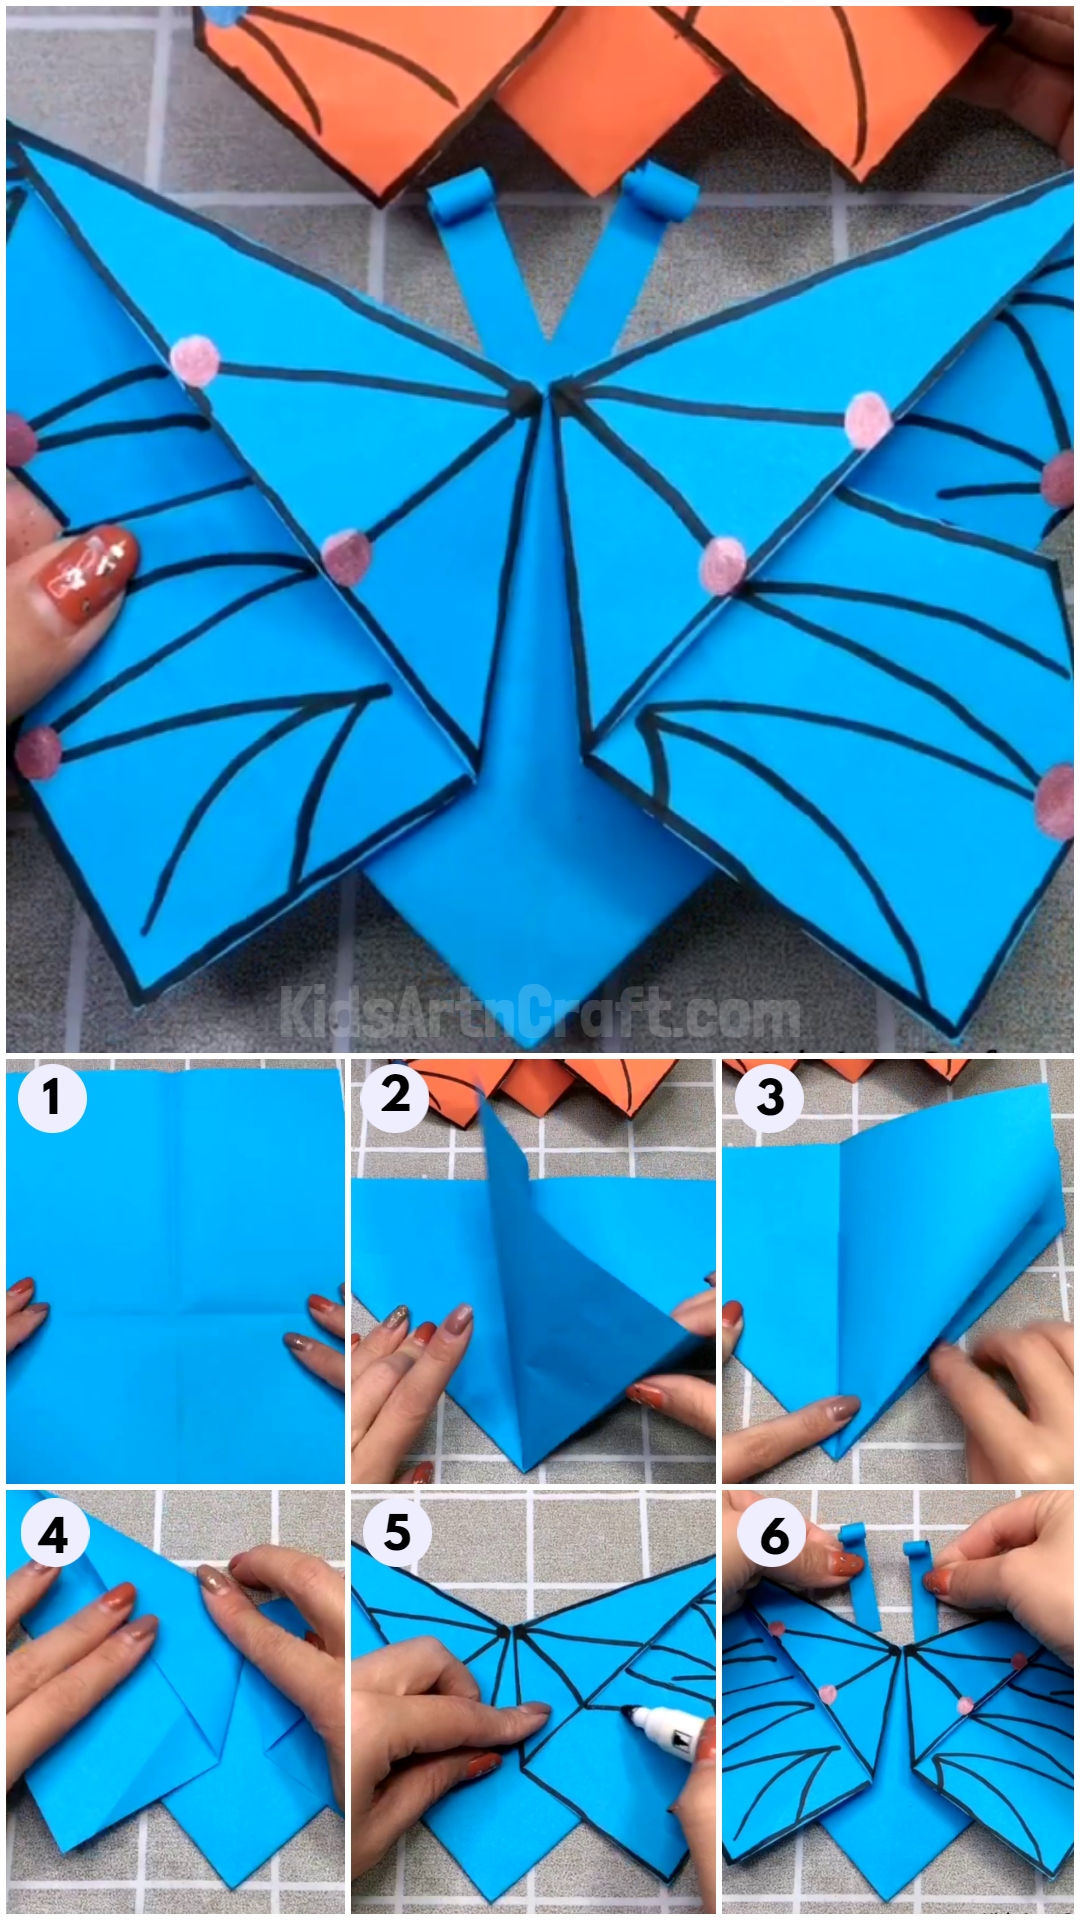 Easy To Make Paper Butterfly Craft - Step-By-Step Tutorial